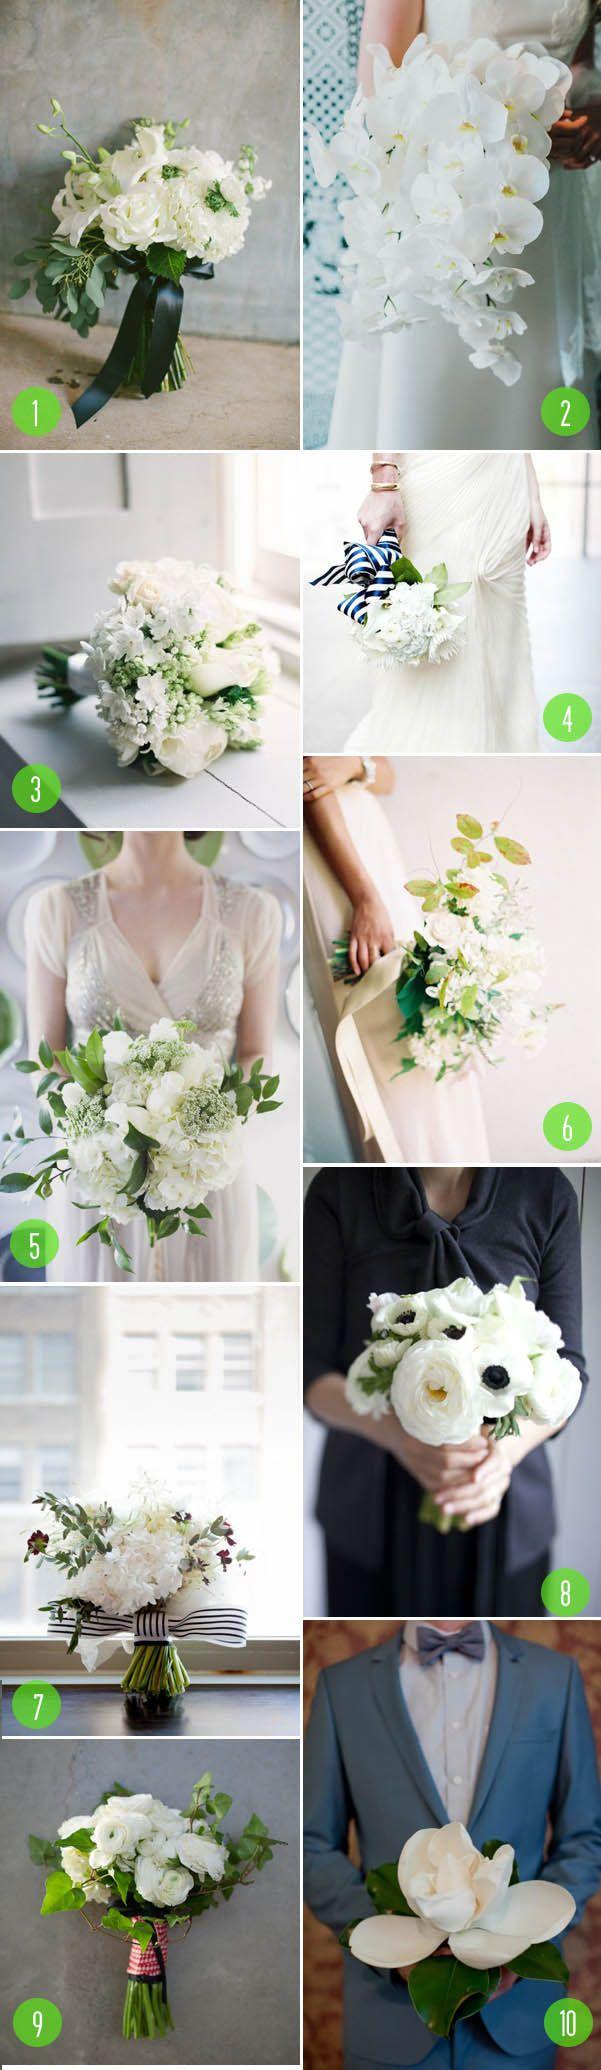 Wedding - Top 10: White Bouquets